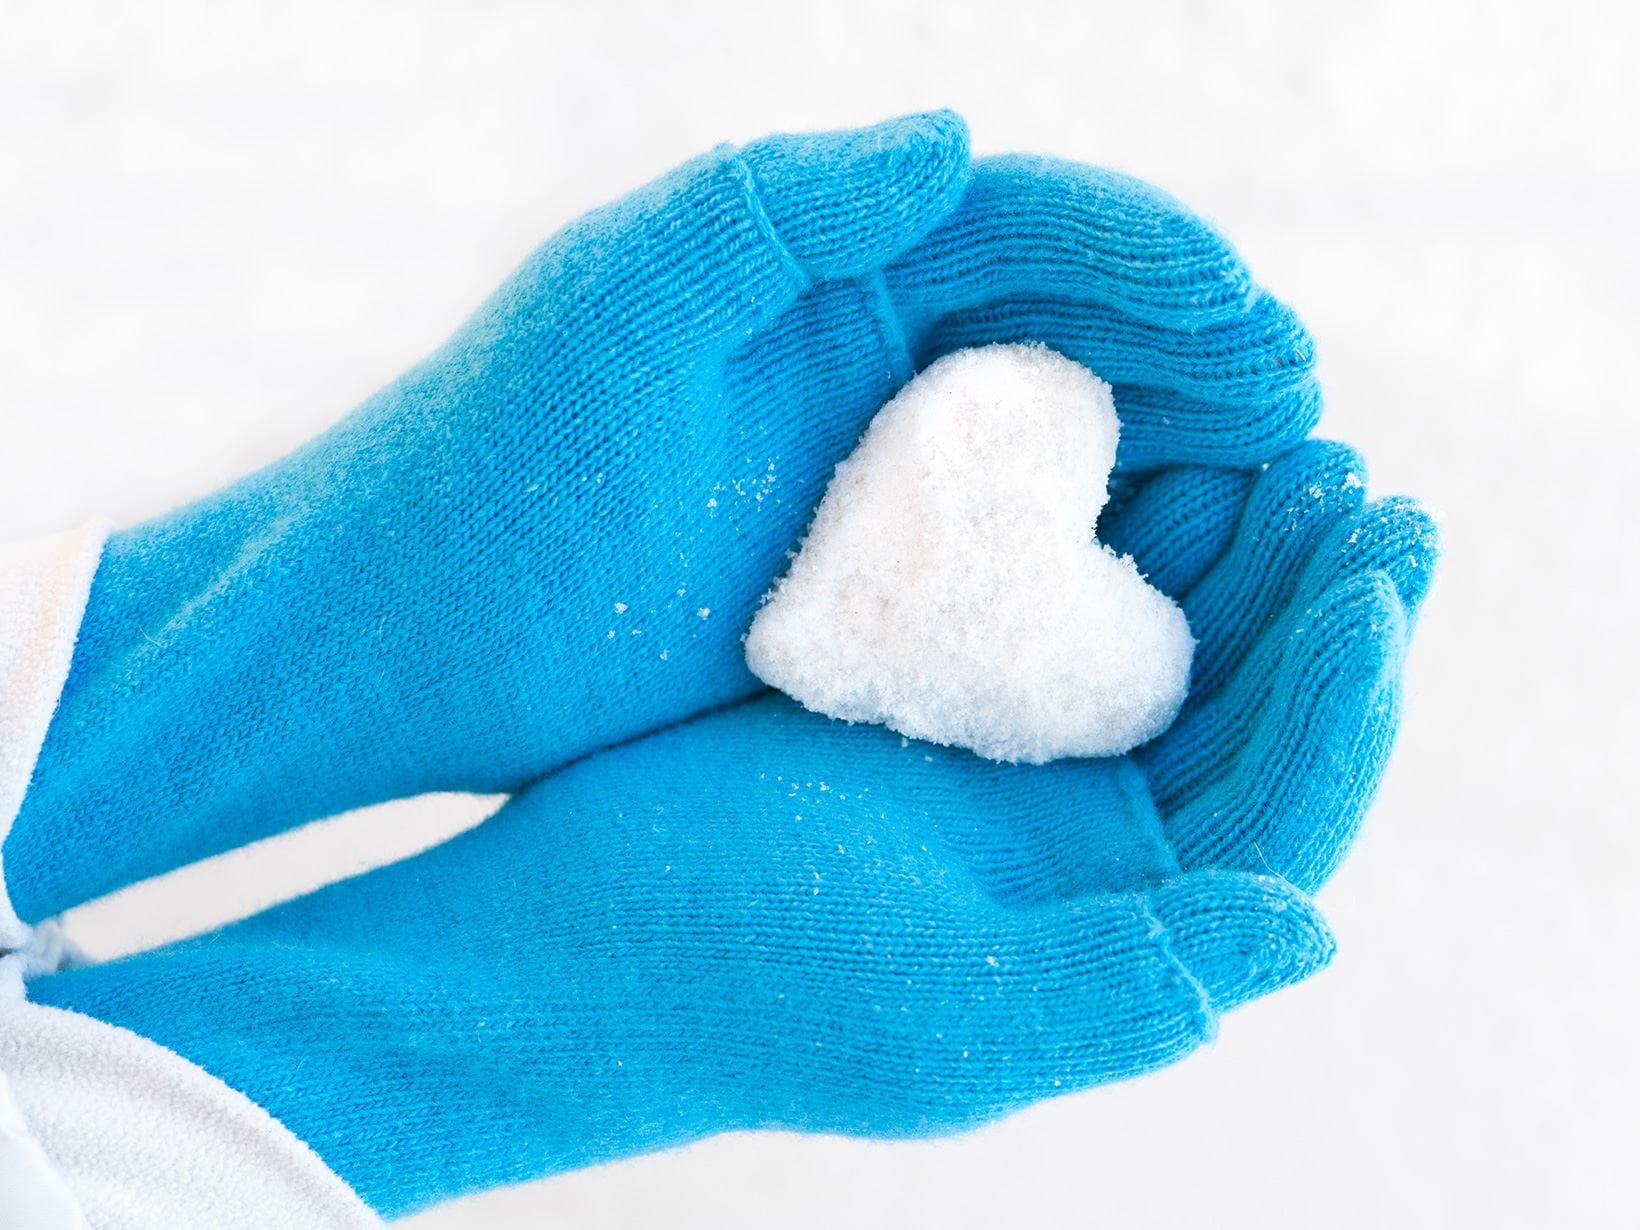 gloves-protect-your-hands-from-the-cold